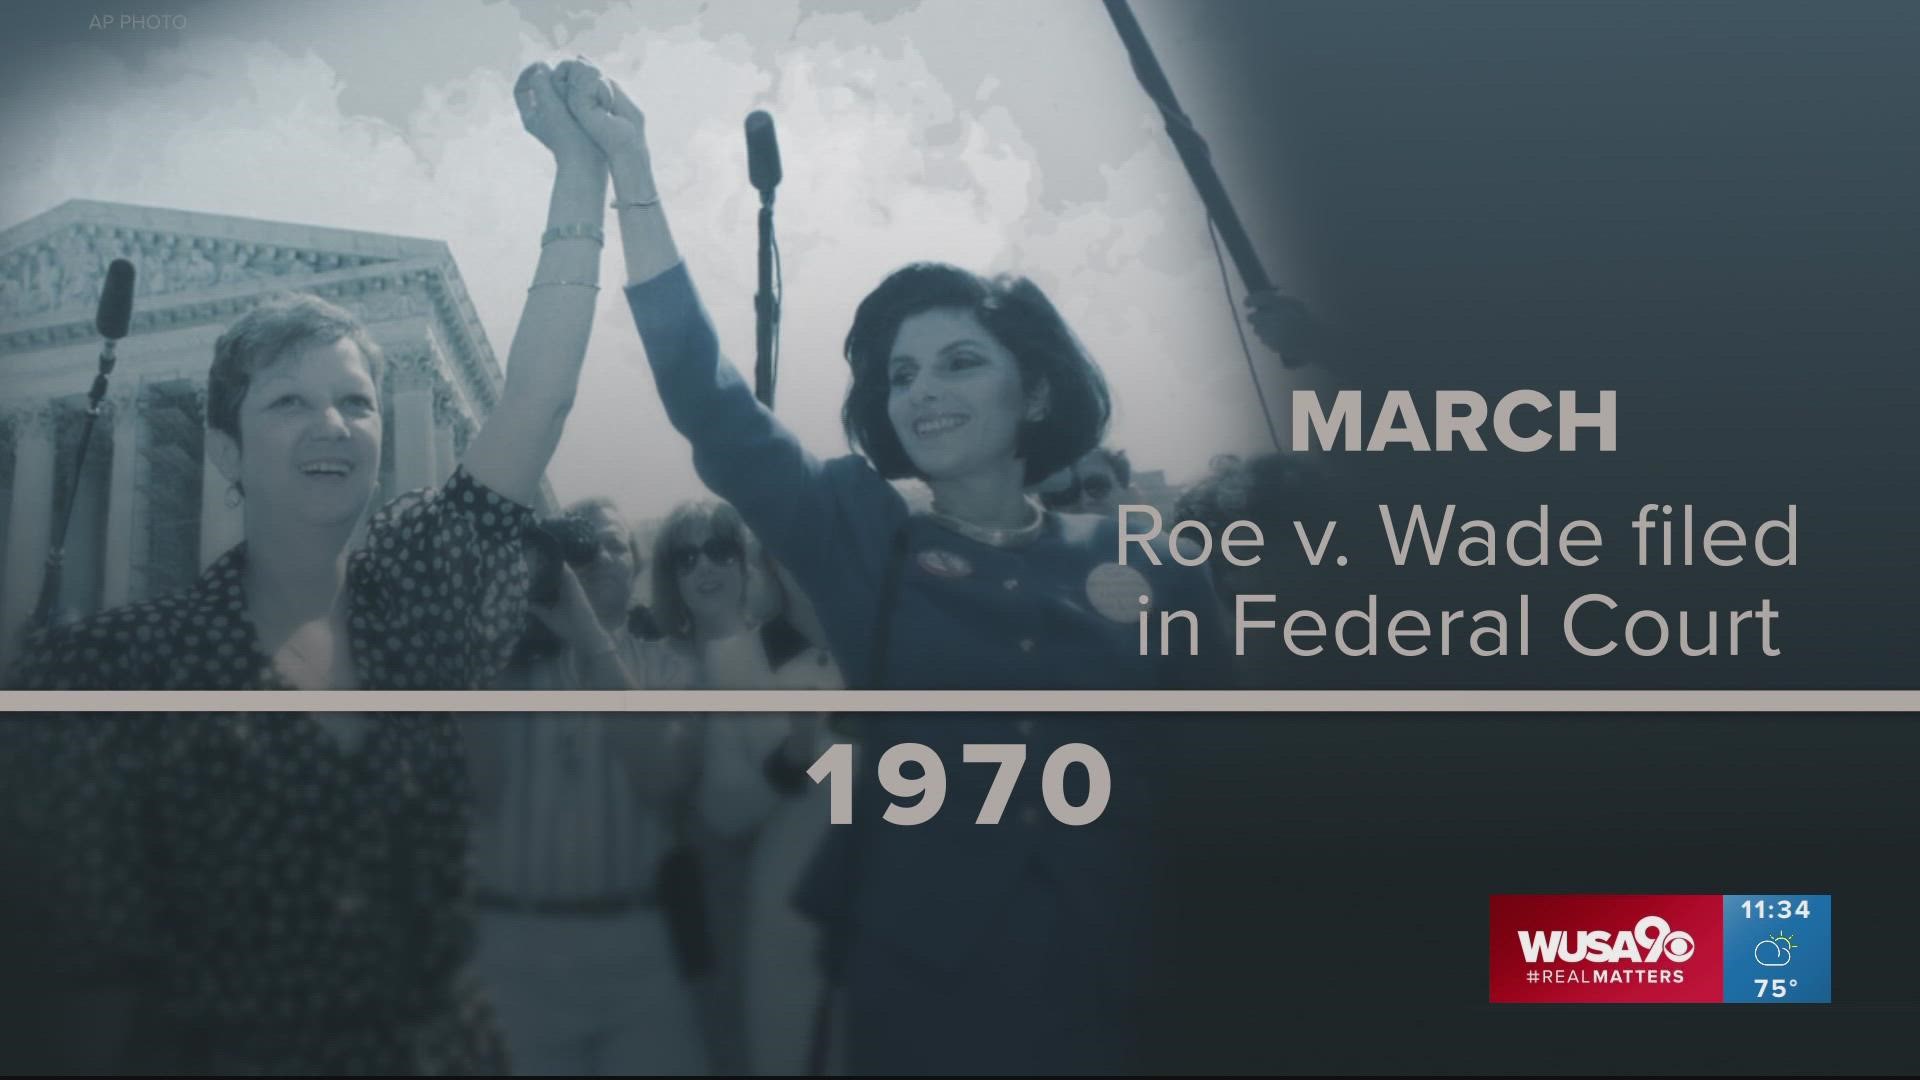 On June 24, 2022, the Supreme Court ended constitutional protections for abortion in place for nearly 50 years in a 6-3 decision to overturn Roe v. Wade.